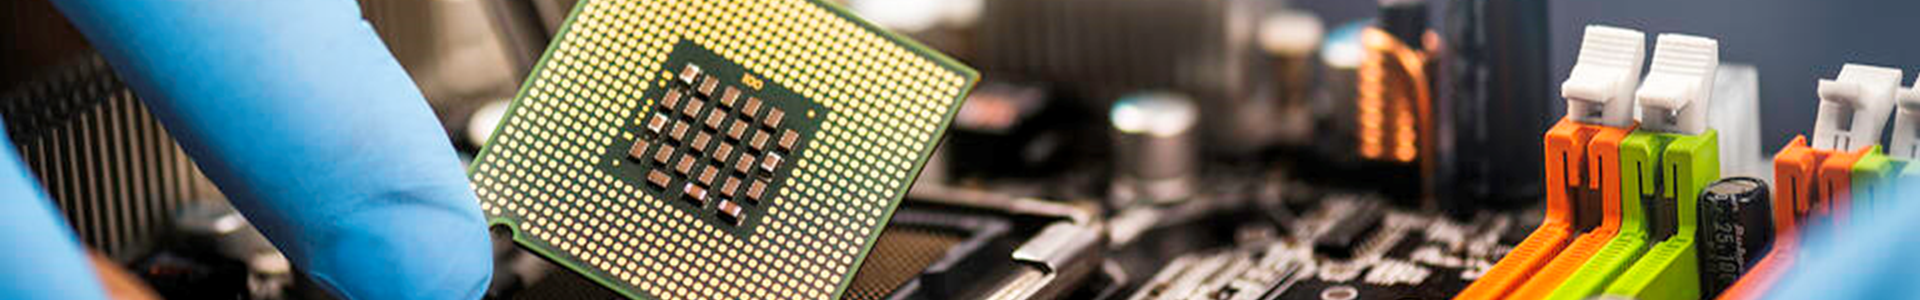 998-22639305_Semiconductor_Reference_Guide_GMA_Banner_1920X300.png